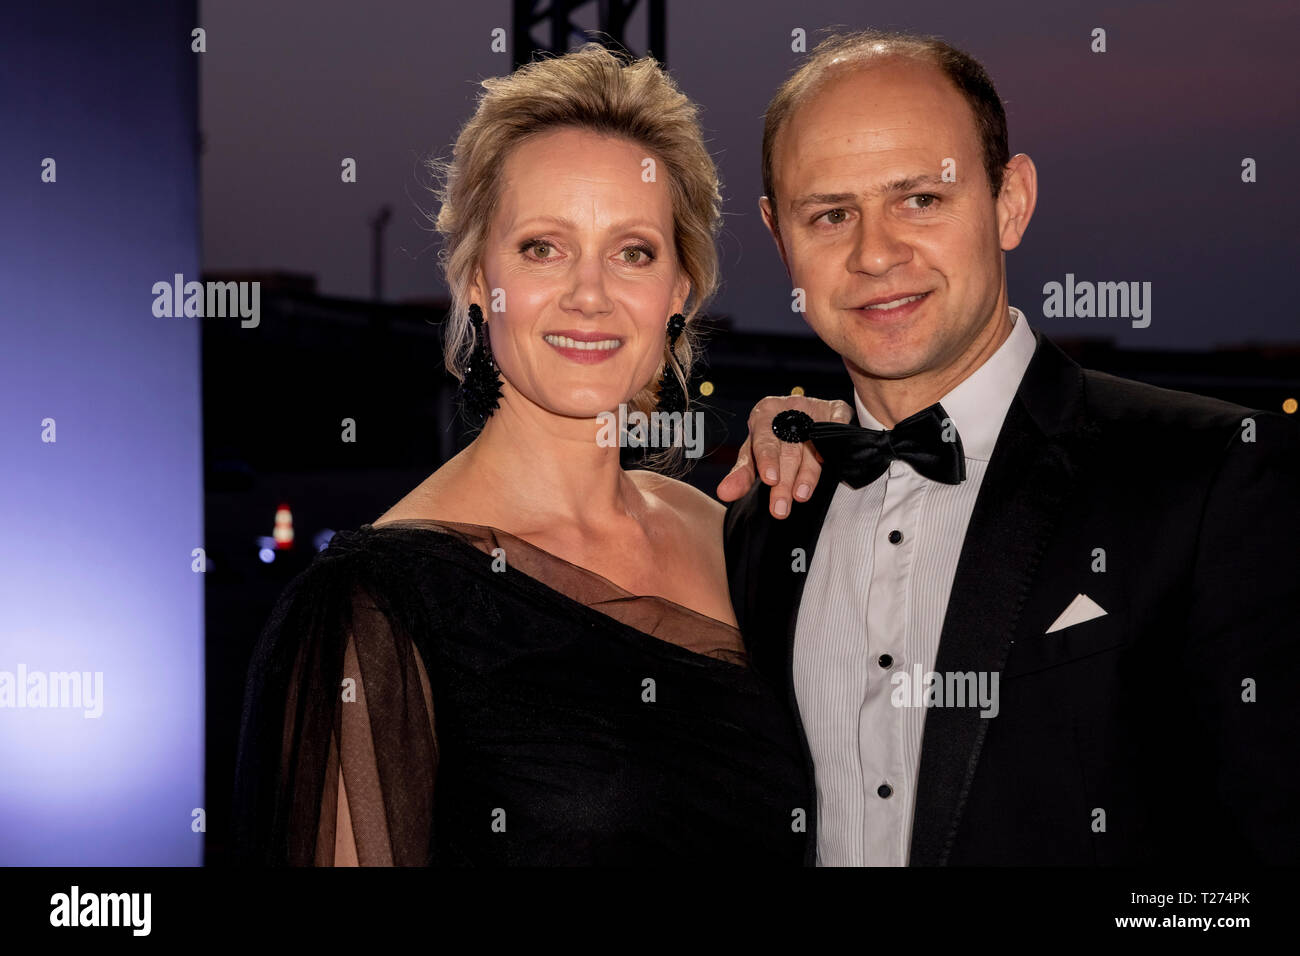 Berlin, Germany. 30th Mar, 2019. Anna Schudt and her husband Moritz Führmann, both actors, are standing on the red carpet in front of the Golden Camera award ceremony at Berlin's disused Tempelhof Airport. Credit: Christoph Soeder/dpa/Alamy Live News Stock Photo